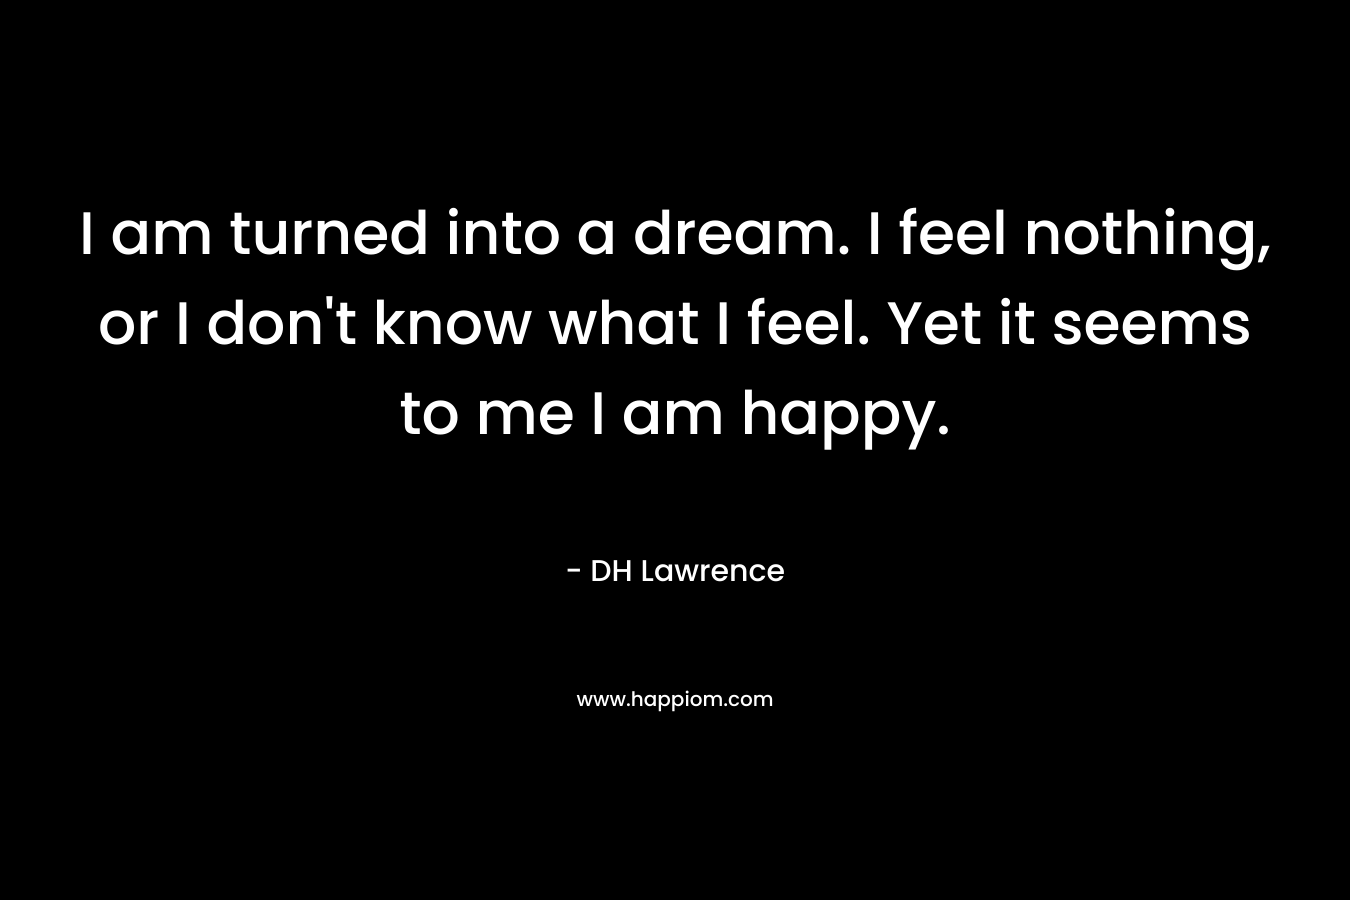 I am turned into a dream. I feel nothing, or I don’t know what I feel. Yet it seems to me I am happy. – DH Lawrence